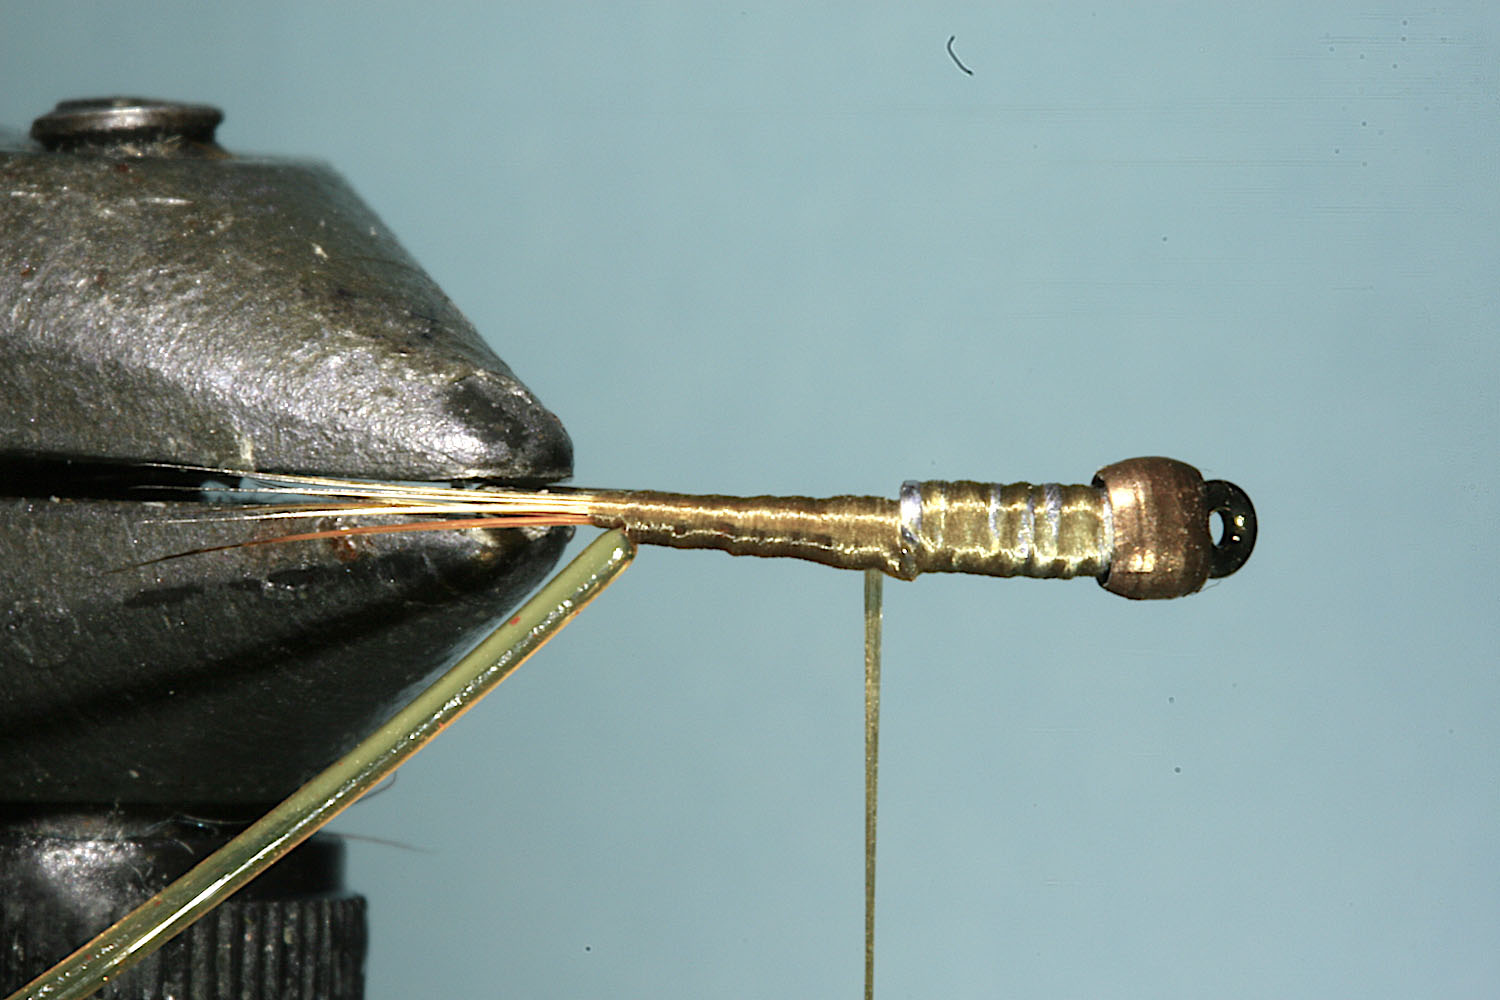 Step 4 of tying sequence for jelly crimp nymph fly